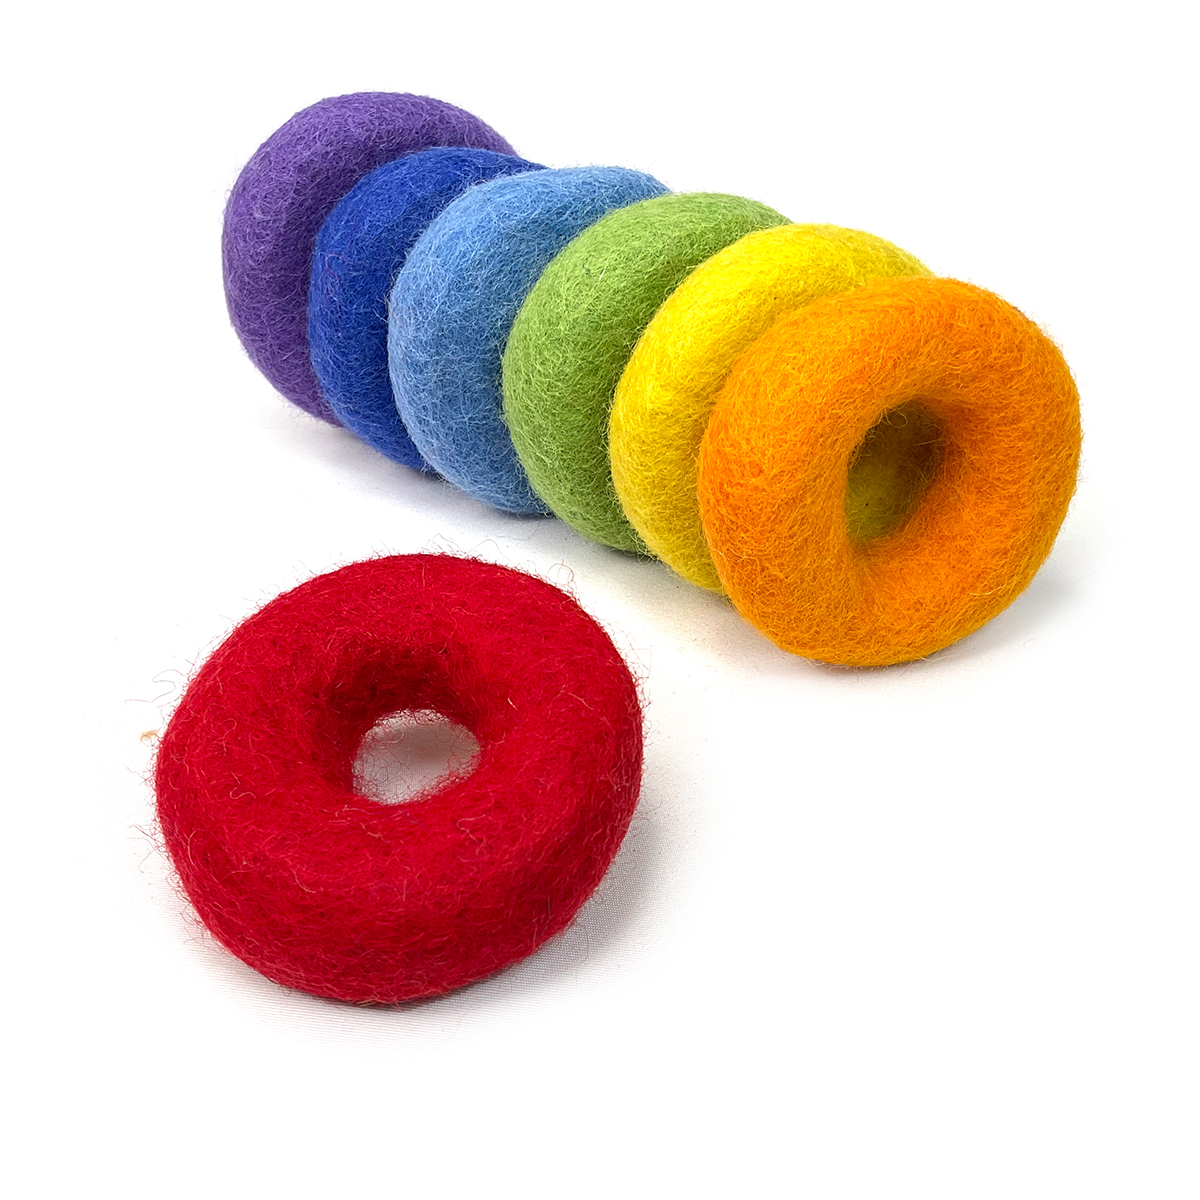 Papoose - Rainbow Felt Rings / Donuts 7pcs (7 colours) WHILE QTY LAST